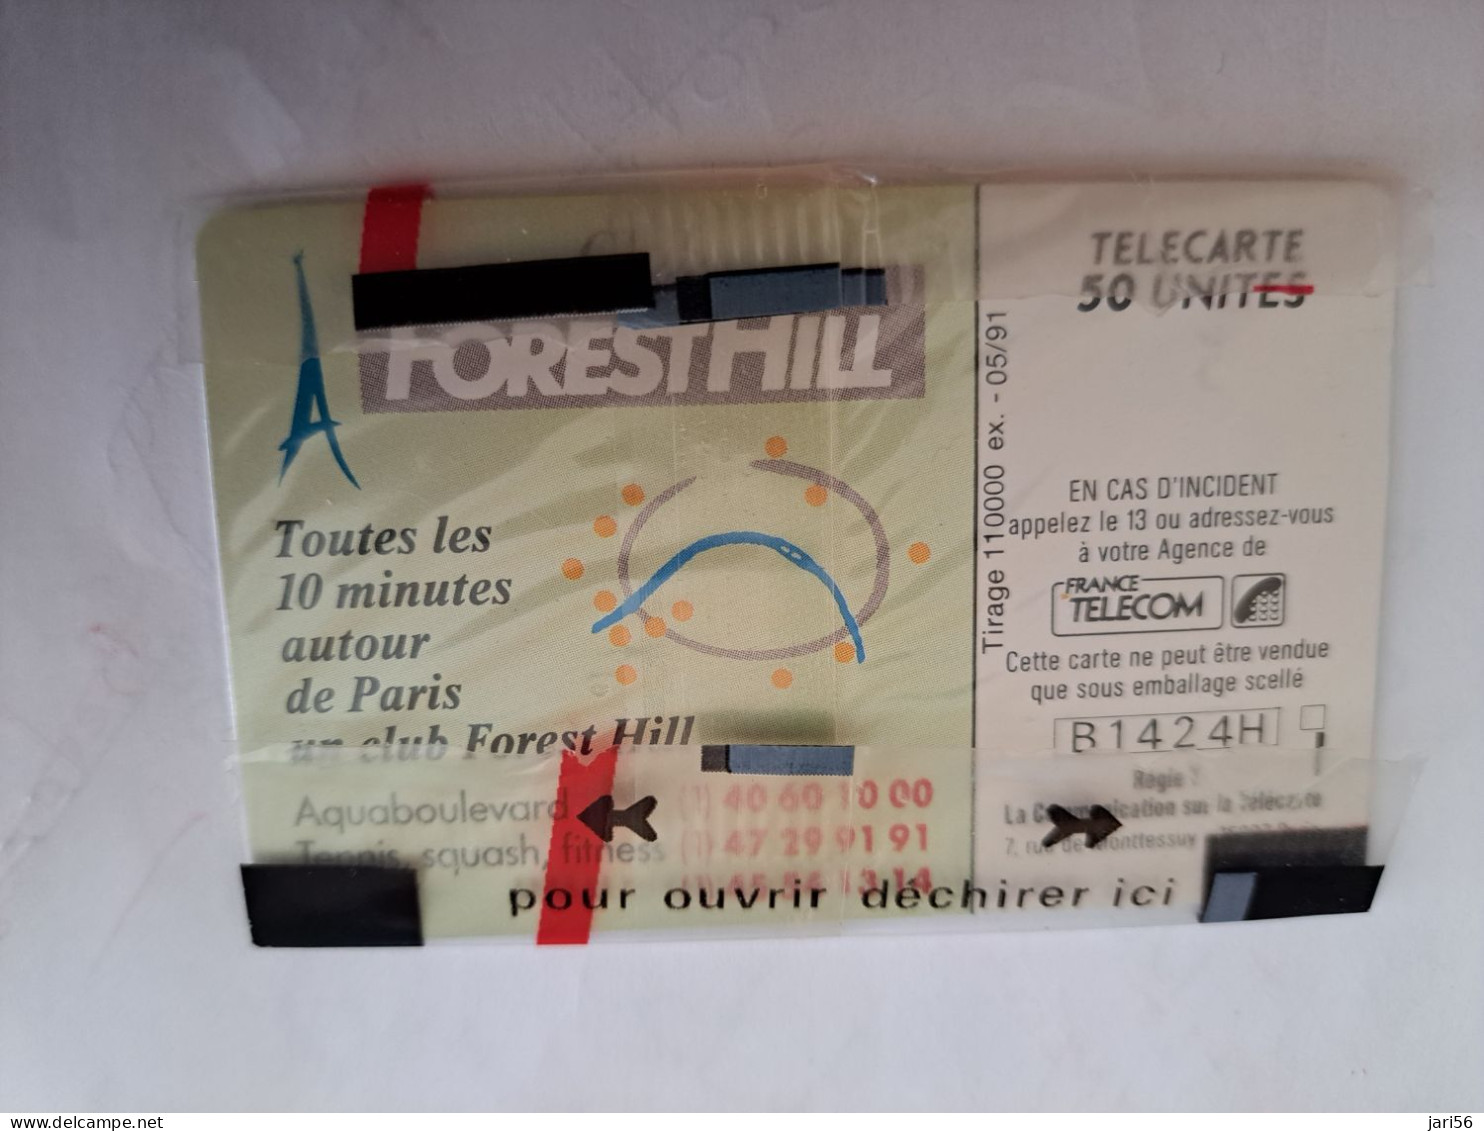 FRANCE/FRANKRIJK   CHIPCARD   50 UNITS / FOREST HILL    MINT IN WRAPPER     WITH CHIP     ** 14111** - Voorafbetaalde Kaarten: Gsm